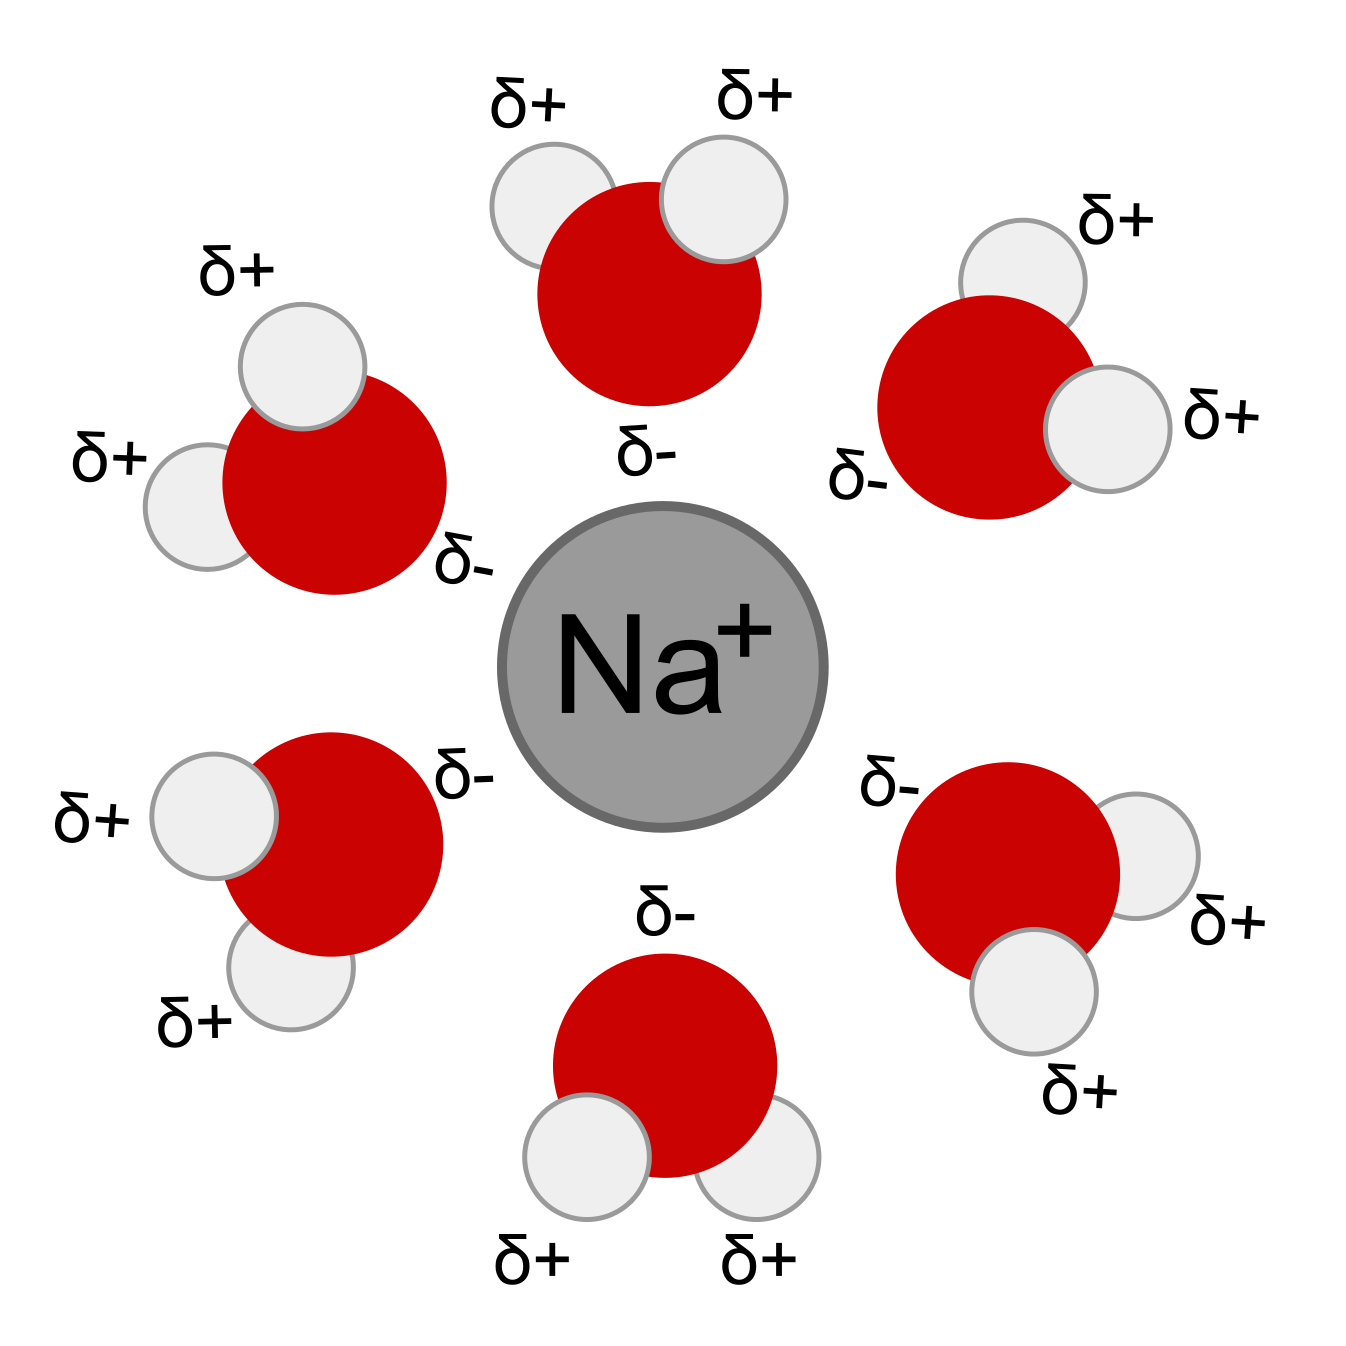 The negative part of the water molecules surrounds the positively-charged sodium ion.